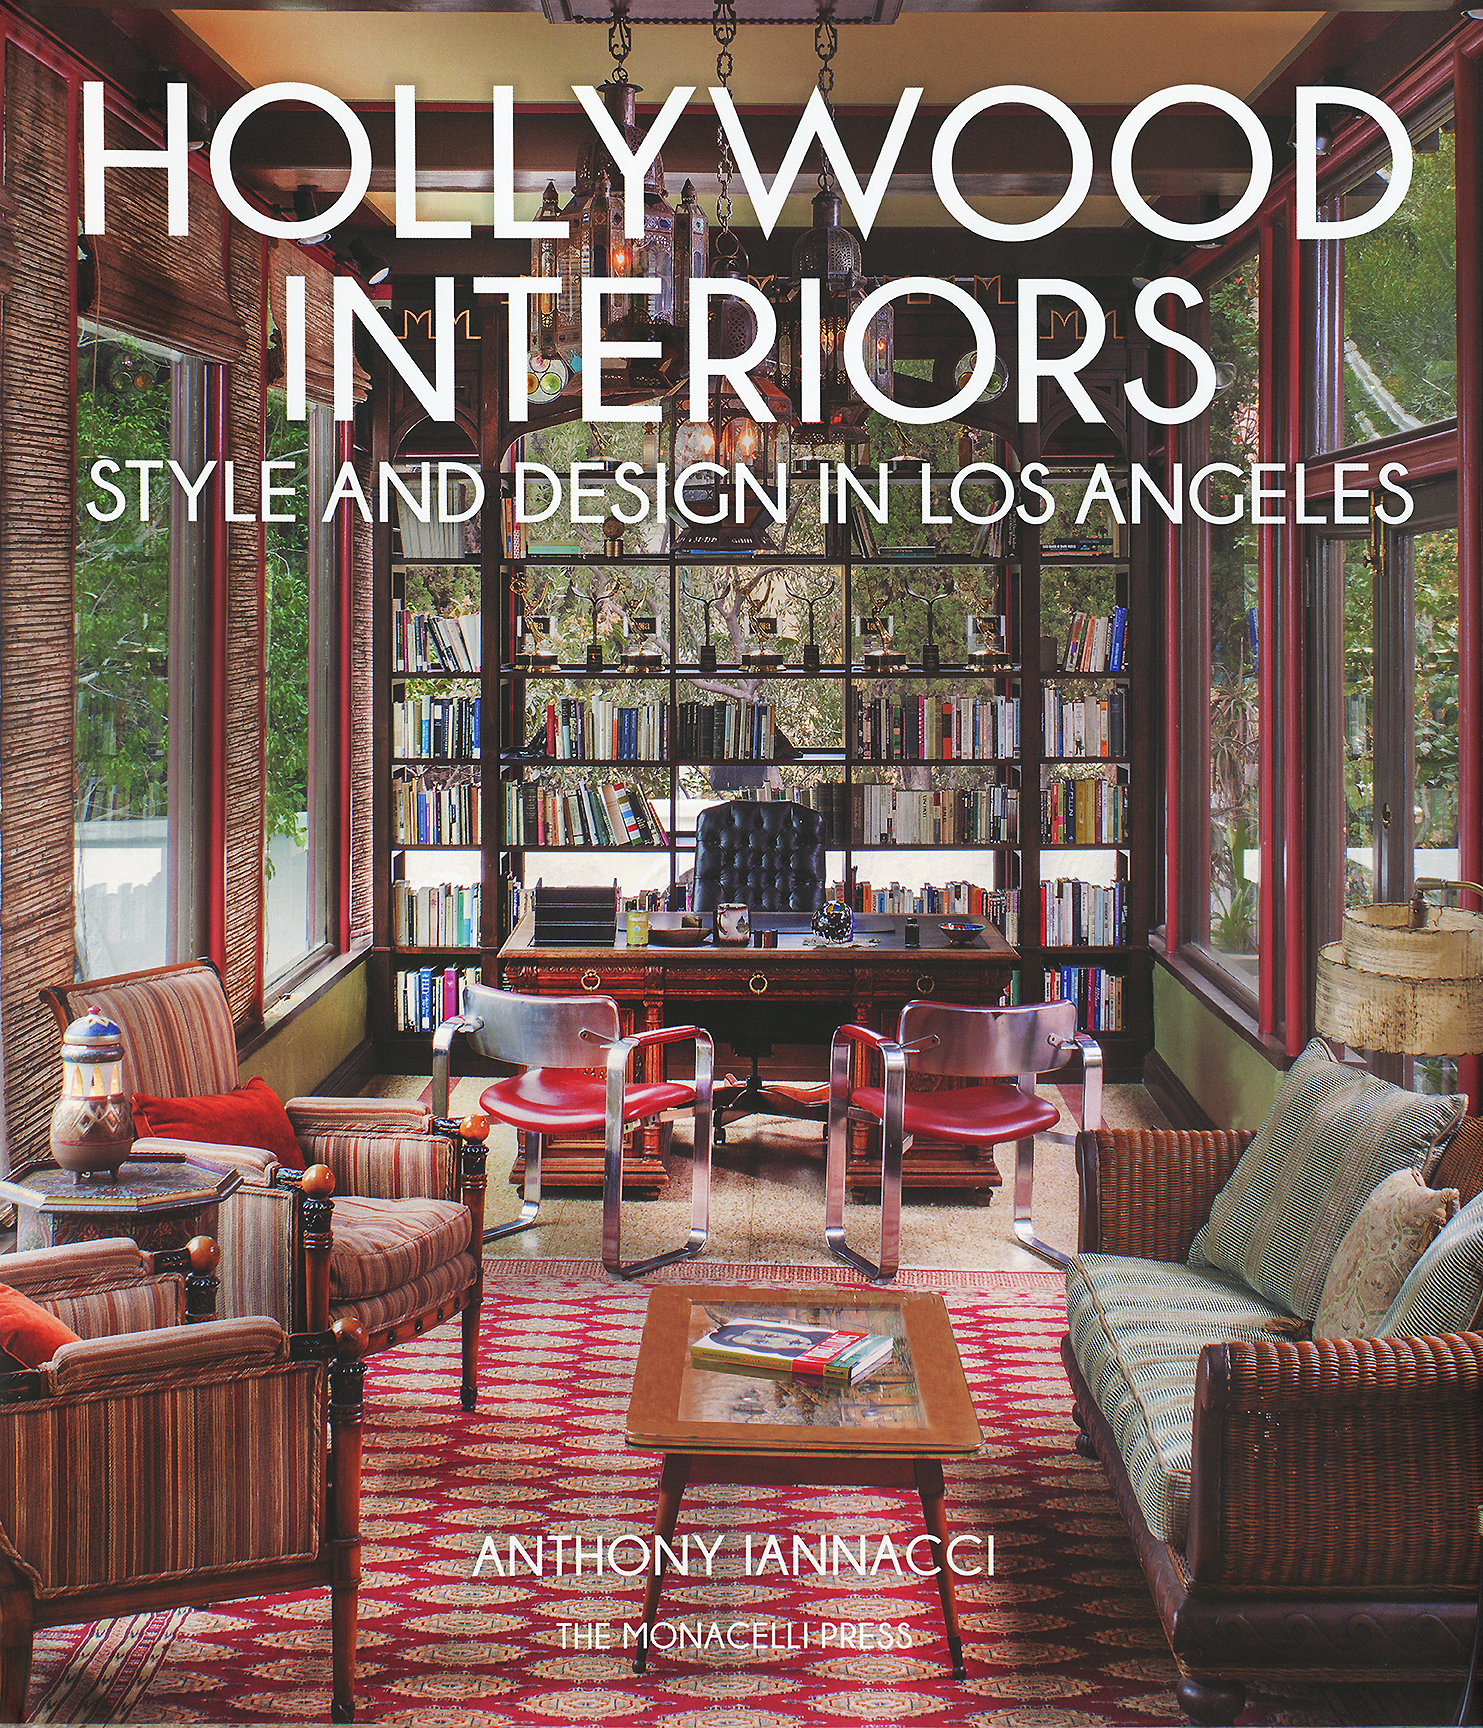 Hollywood Interiors book cover.jpg